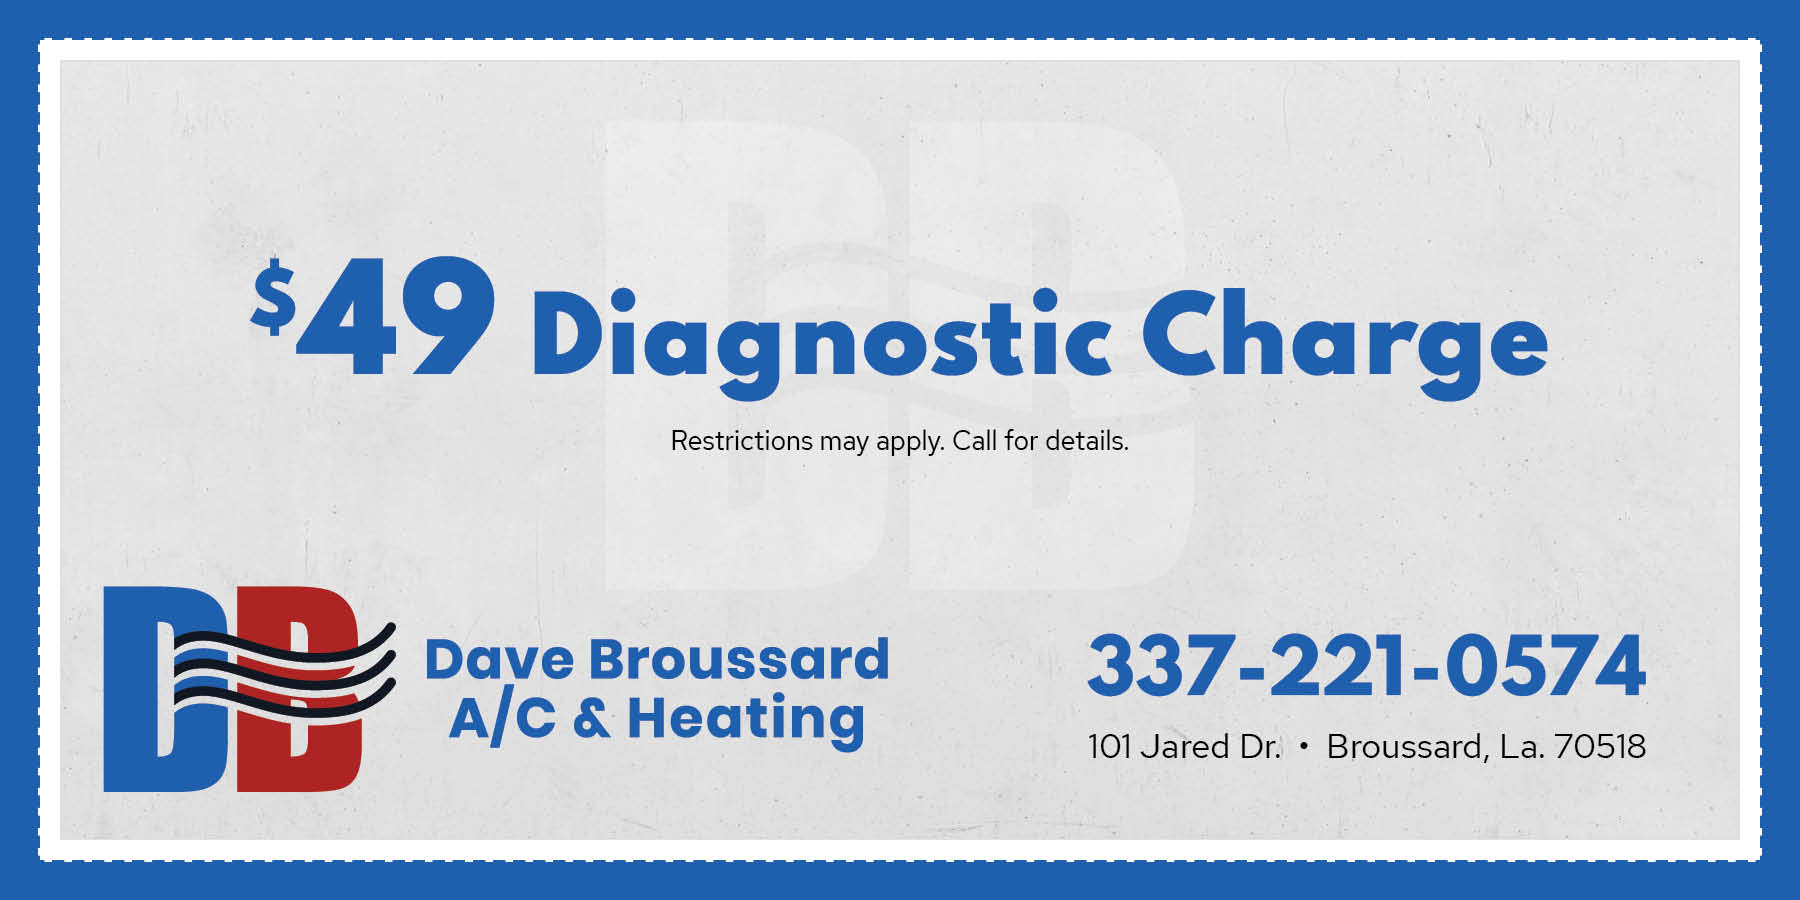  diagnostic charge. Contact us for details. Retrictions apply.